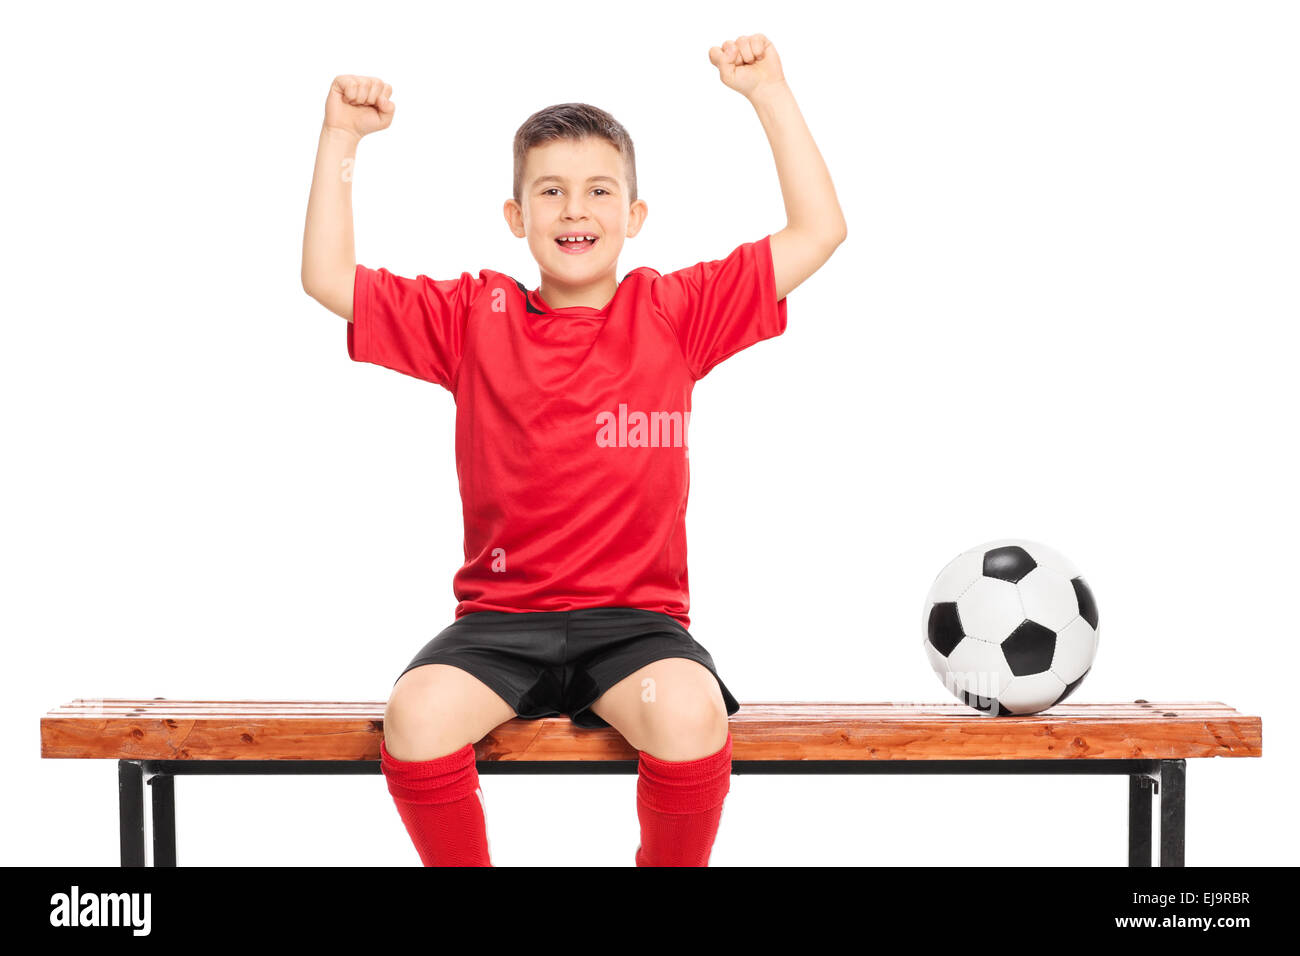 Joyful junior soccer player in red shirt gesturing happiness seated on wooden bench isolated on white background Stock Photo